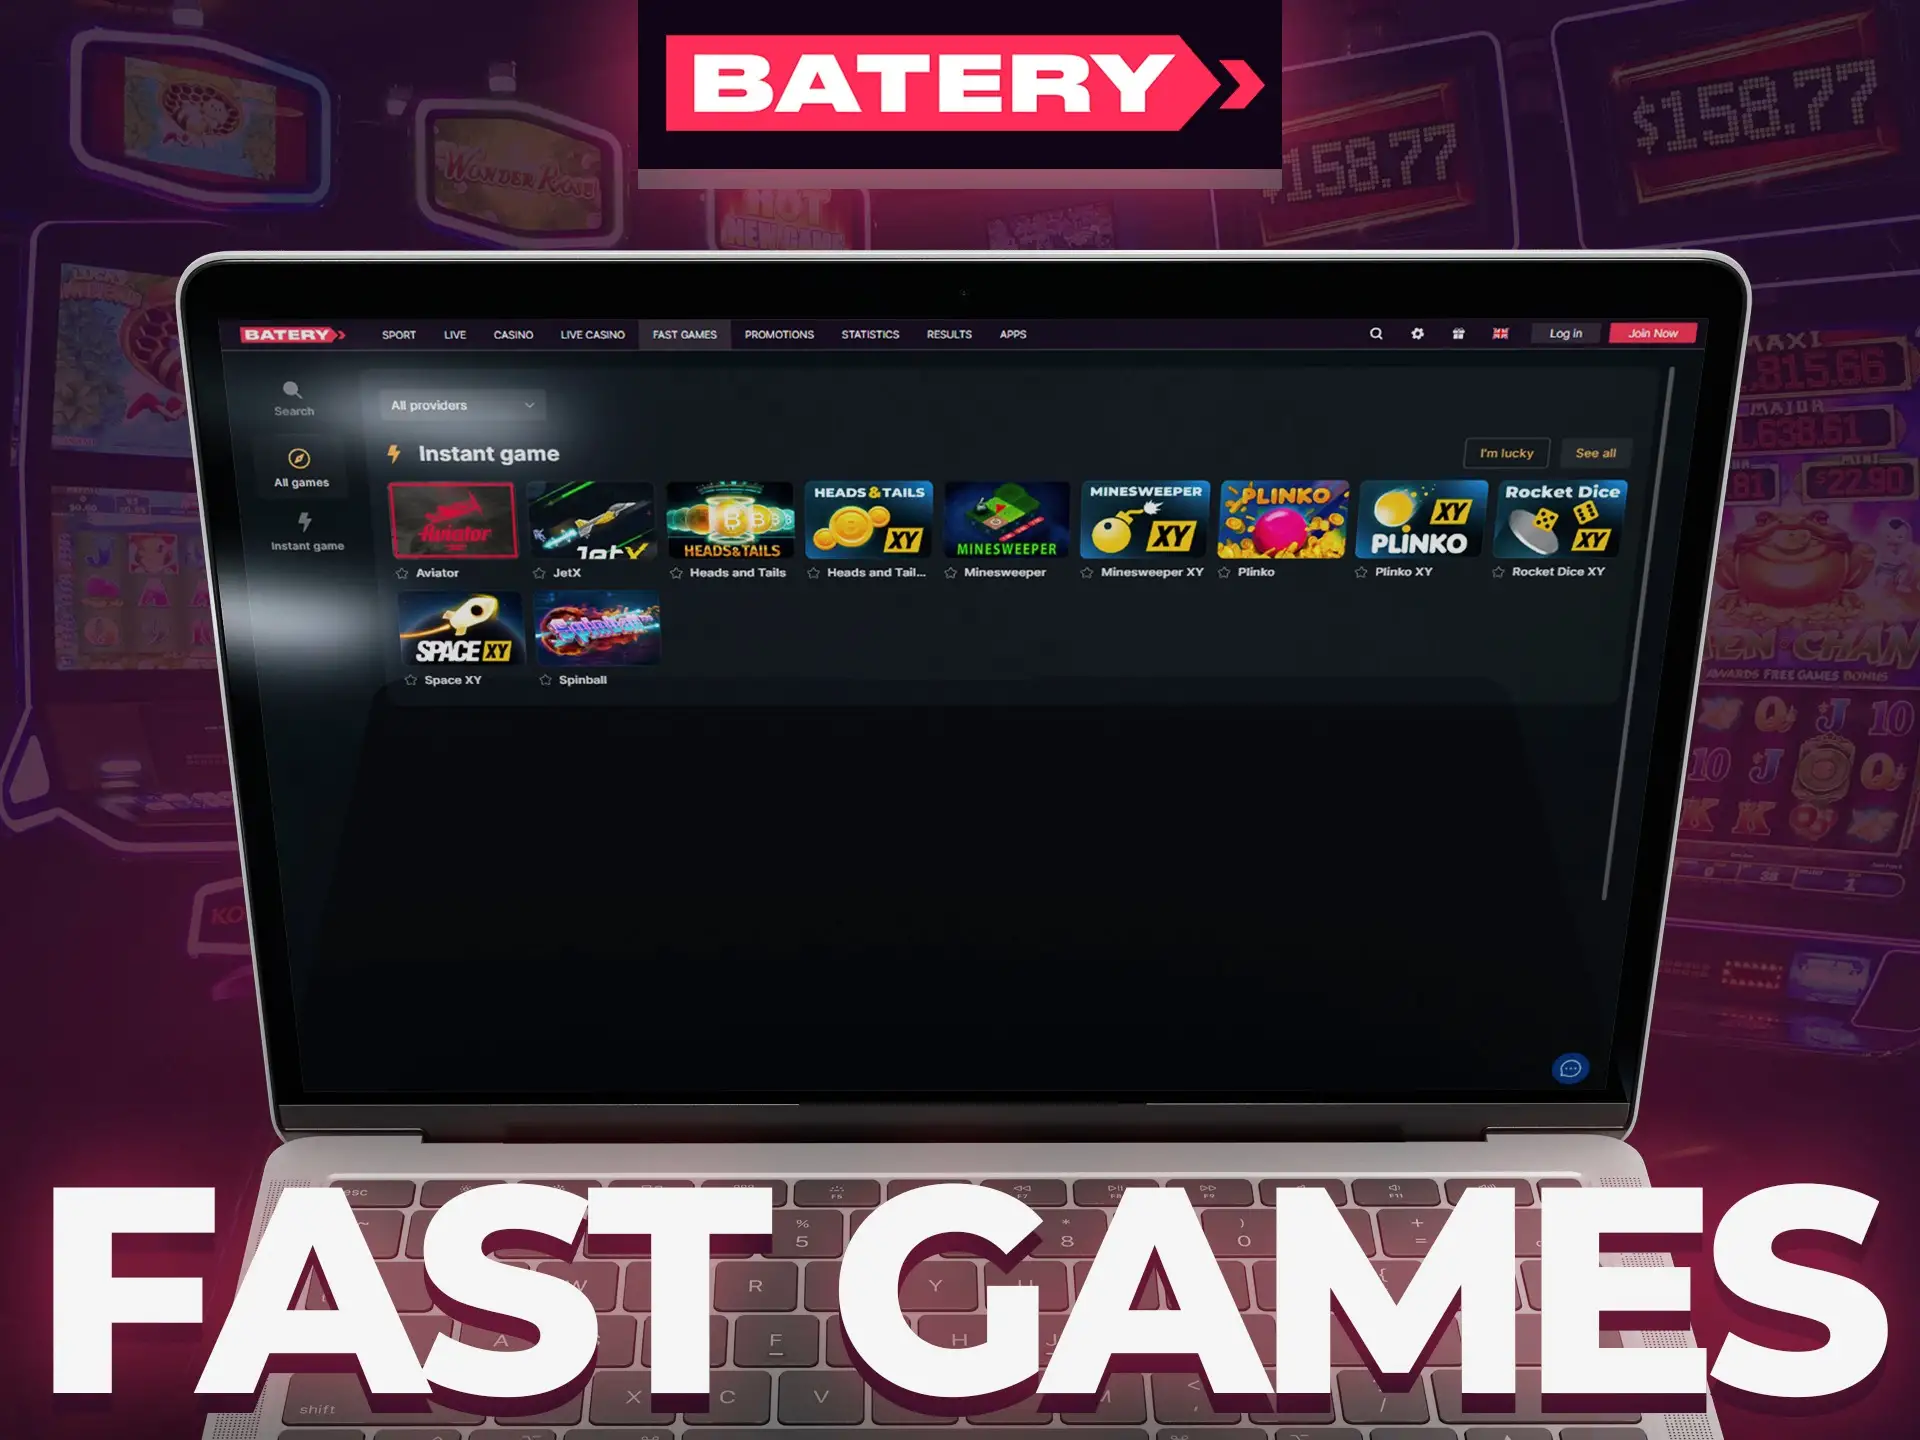 You can find Batery fast games on special page.